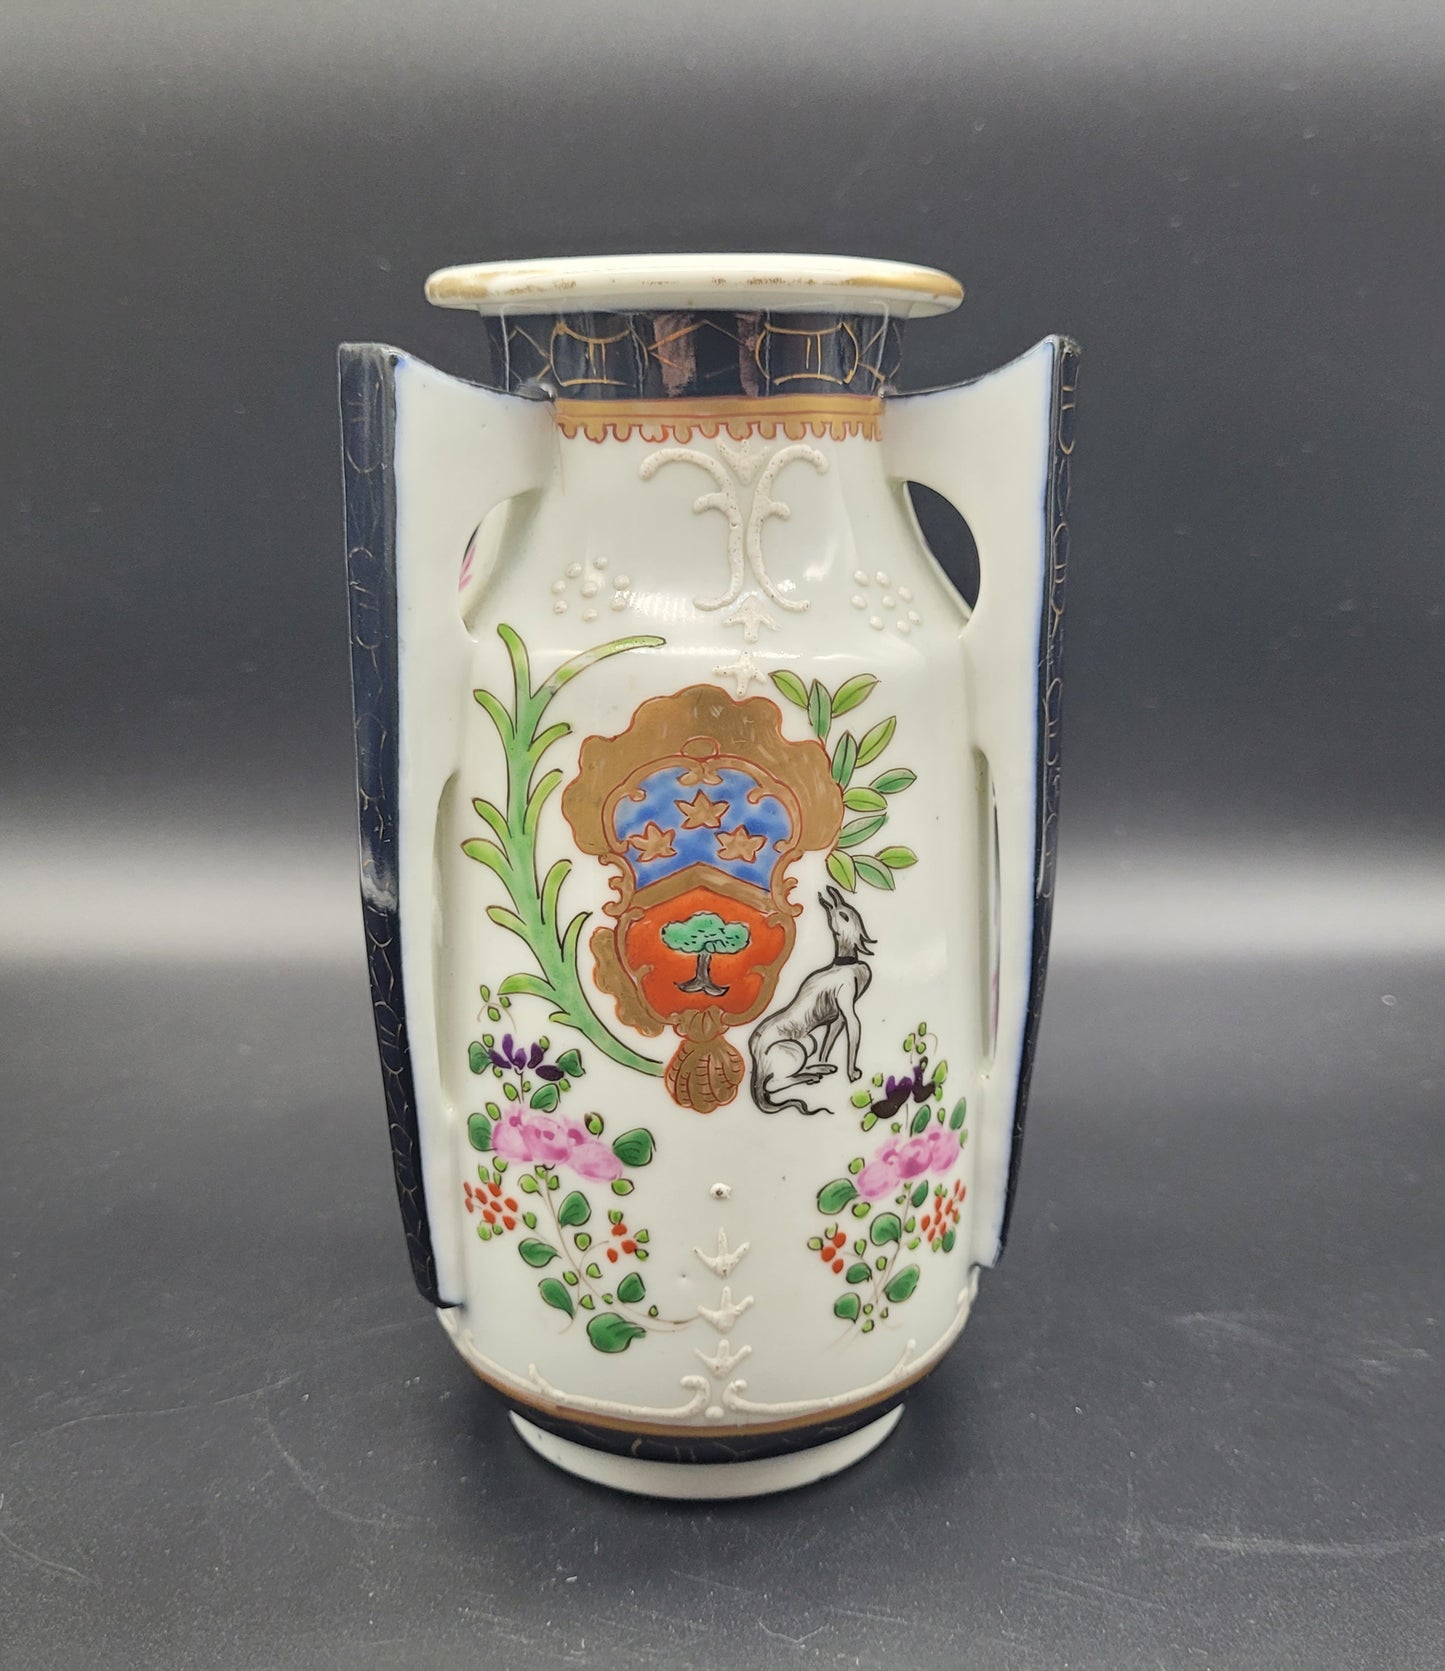 Chinese Porcelain Armorial Vase / Chinese Export Style Vase Samson?